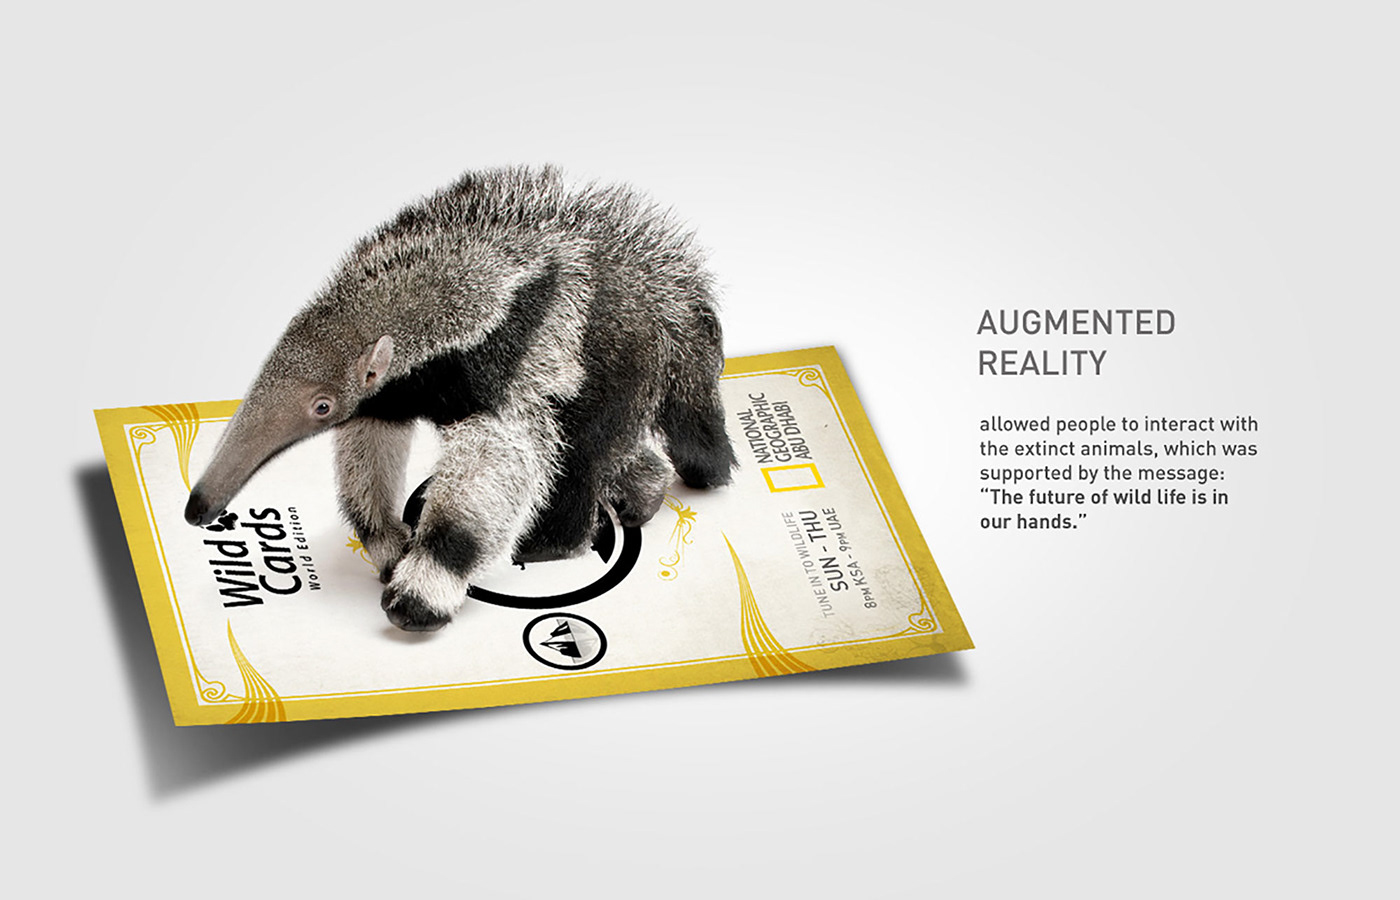 national geographic Nat Geo wild cards cards interactive augmented reality A.R. facebook app environment Animal protection conservation